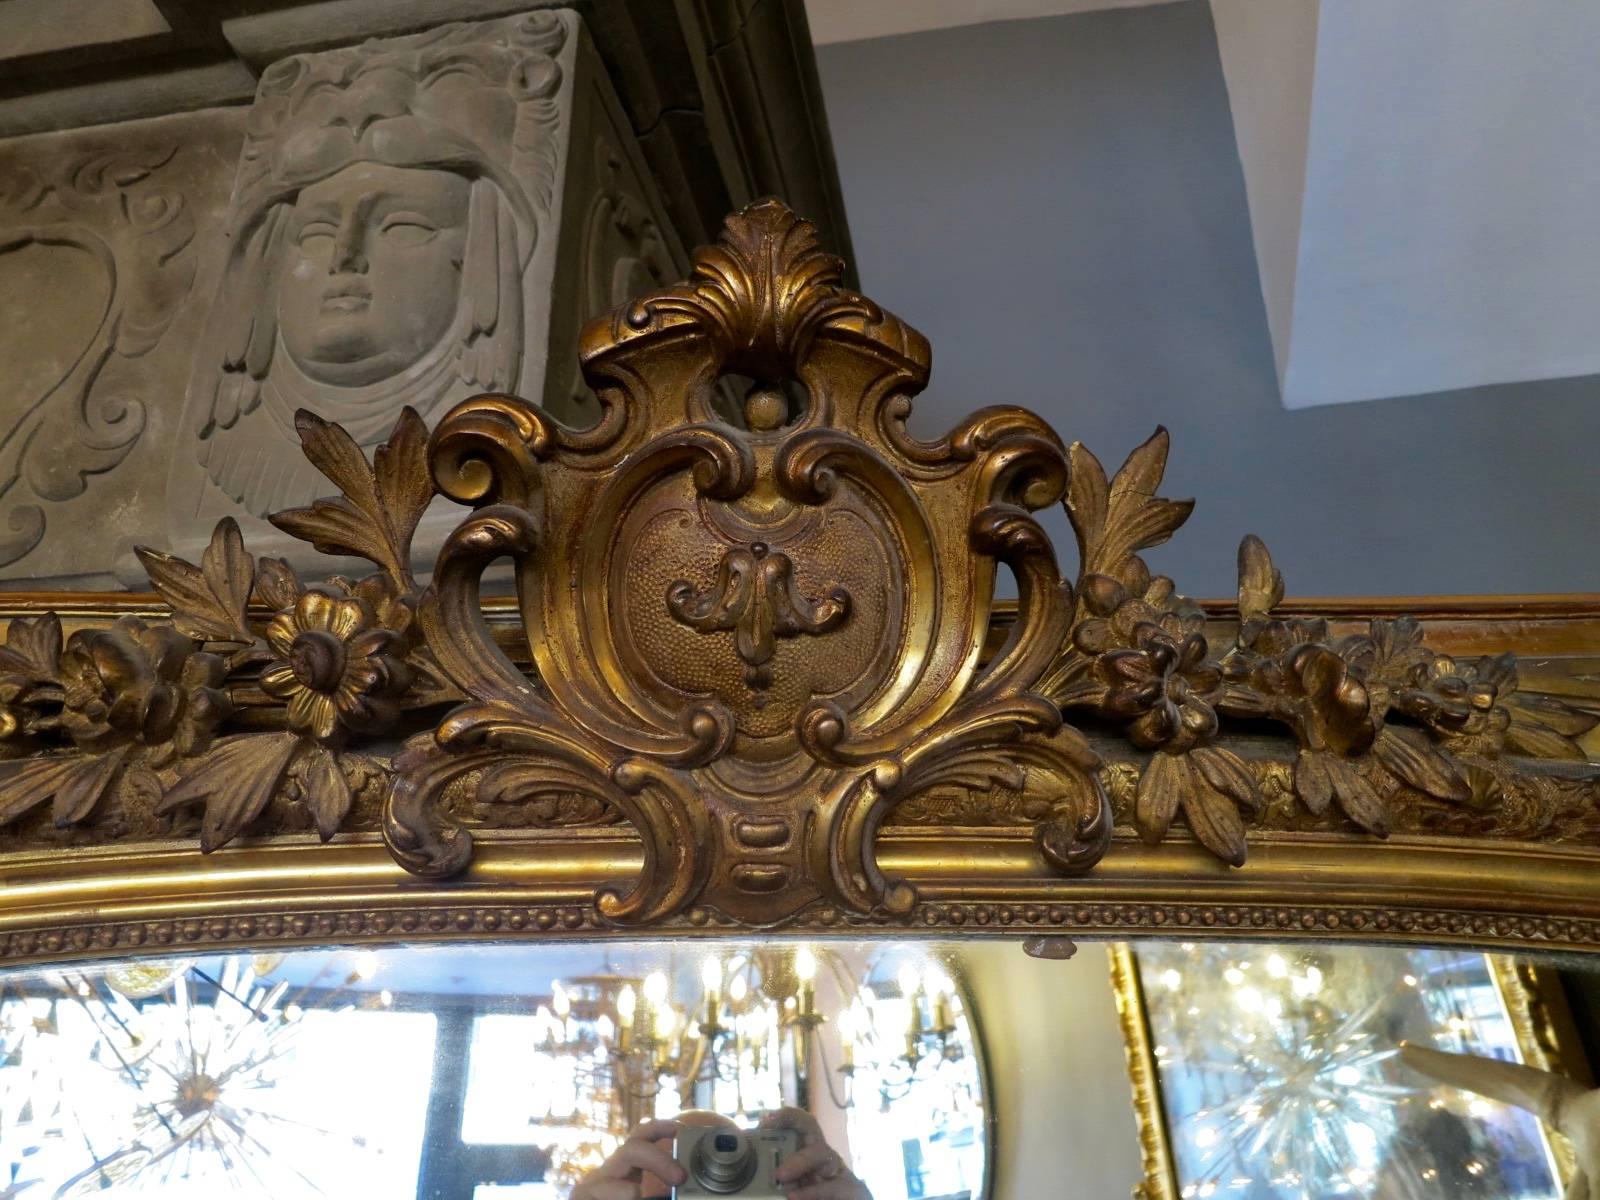 A large antique 19th century French overmantel mirror, with original plate mirror decorative frame and large central cartouche.